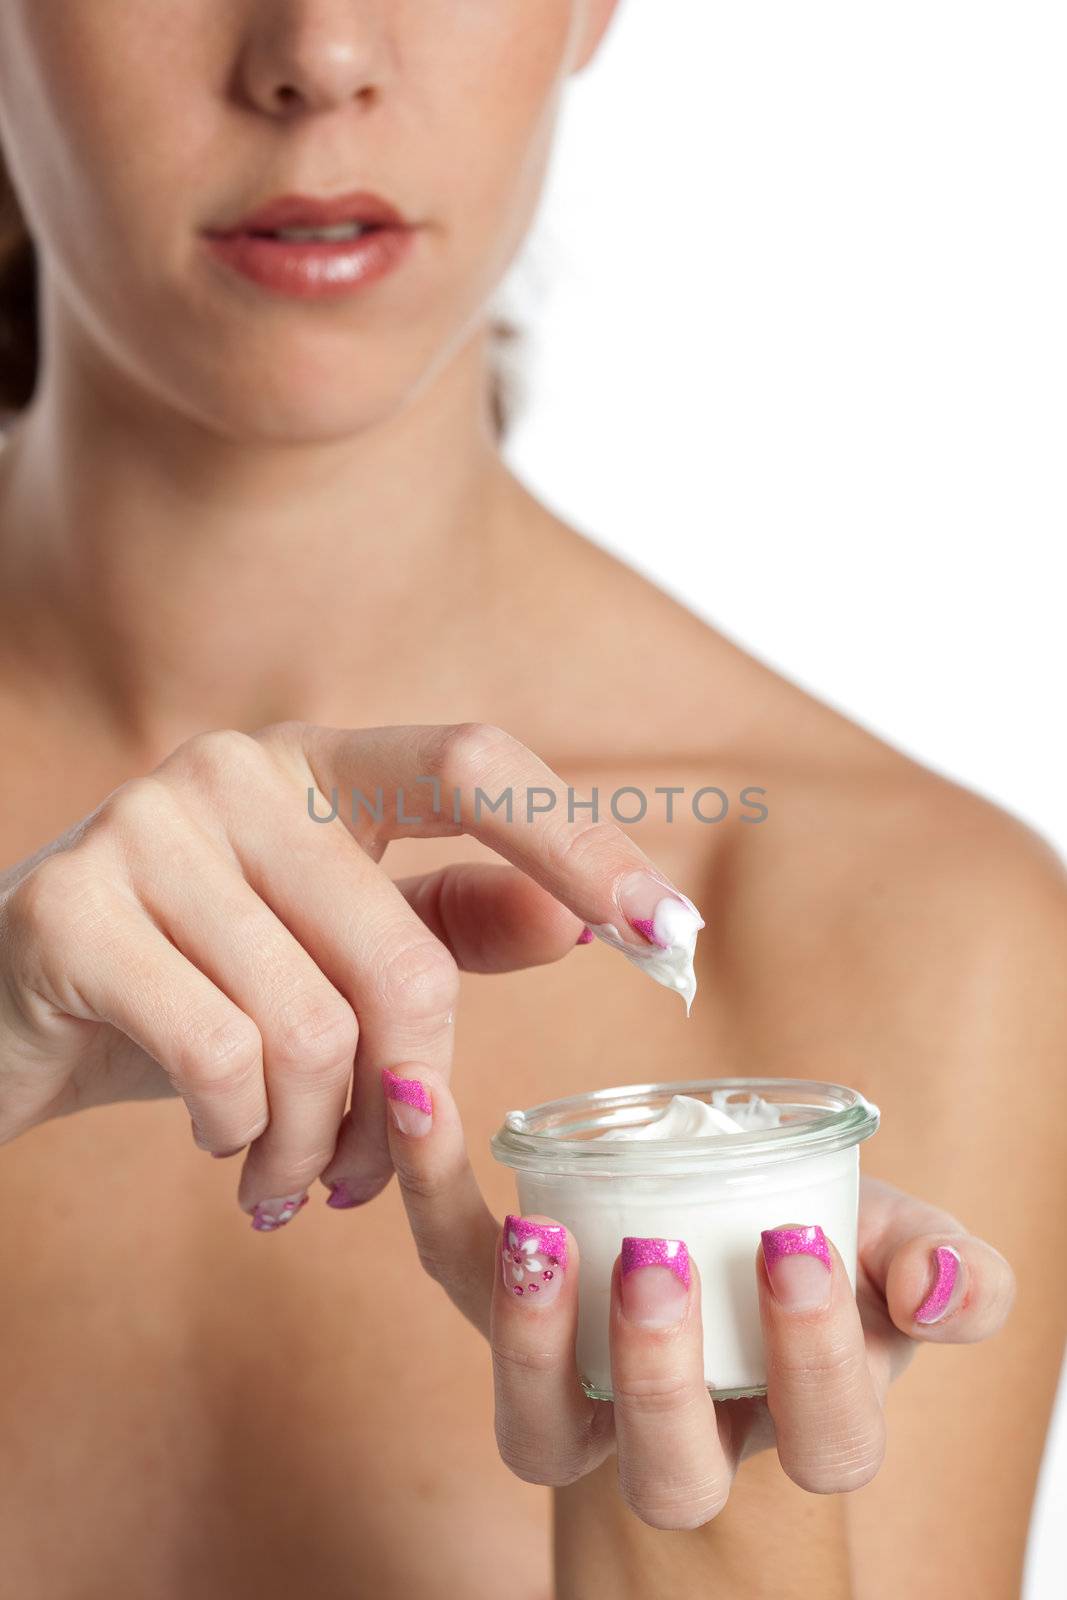 Using beauty creme by Fotosmurf